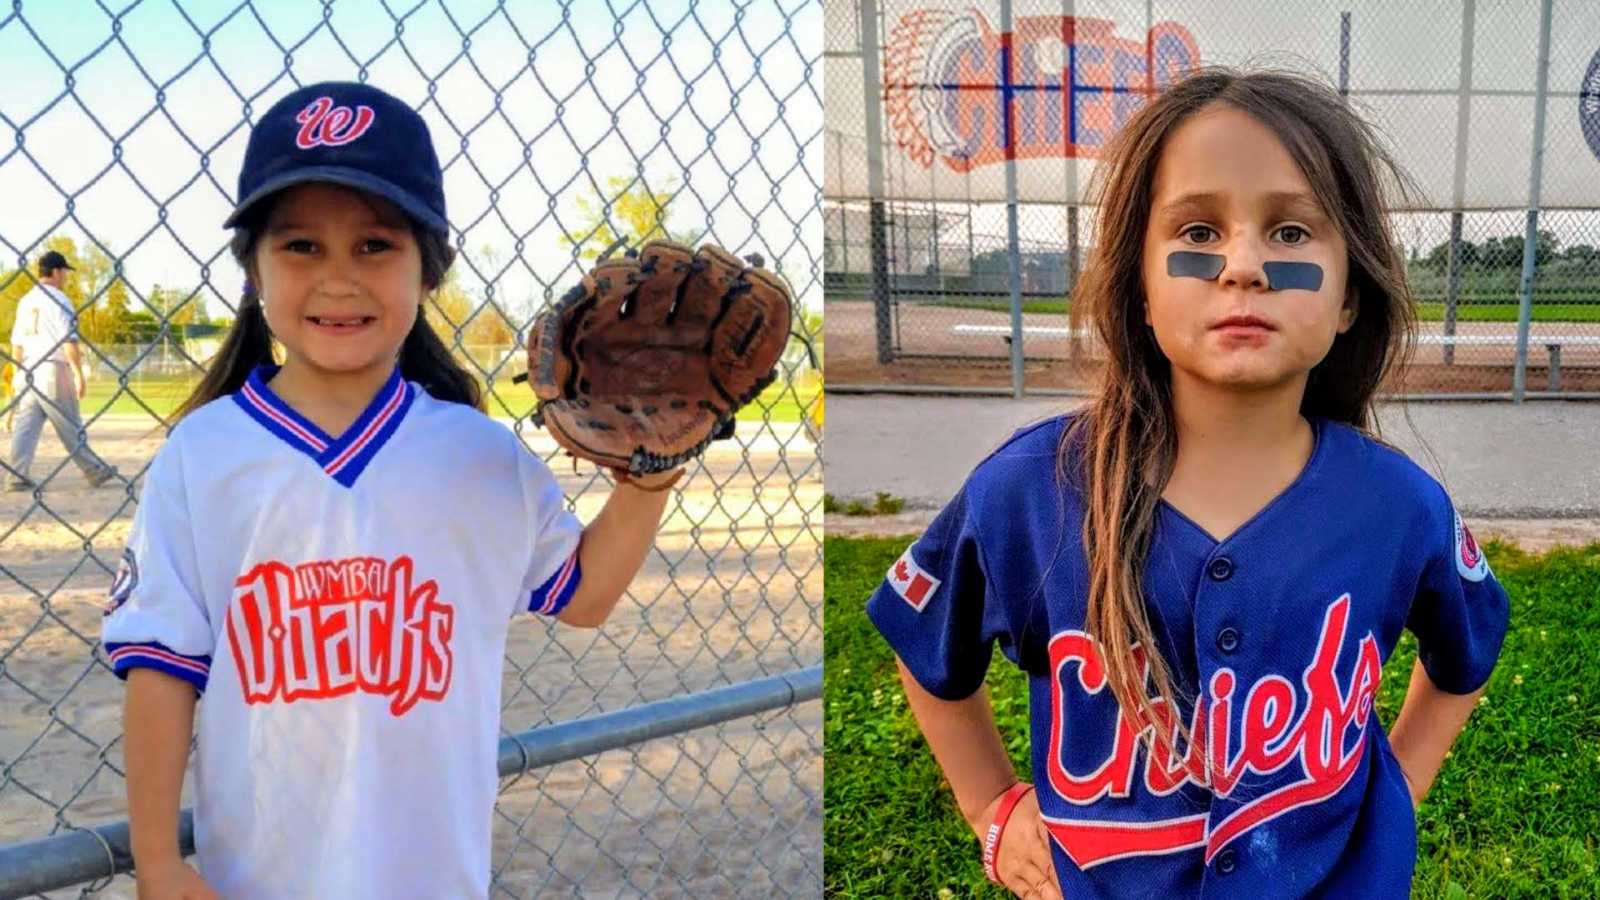 Girls shouldn't play baseball. Stick to softball.' The coach suddenly cut  our daughter from the team.': 7-year-old girl, MVP player gets dropped from  baseball team after 'advanced plays' – Love What Matters